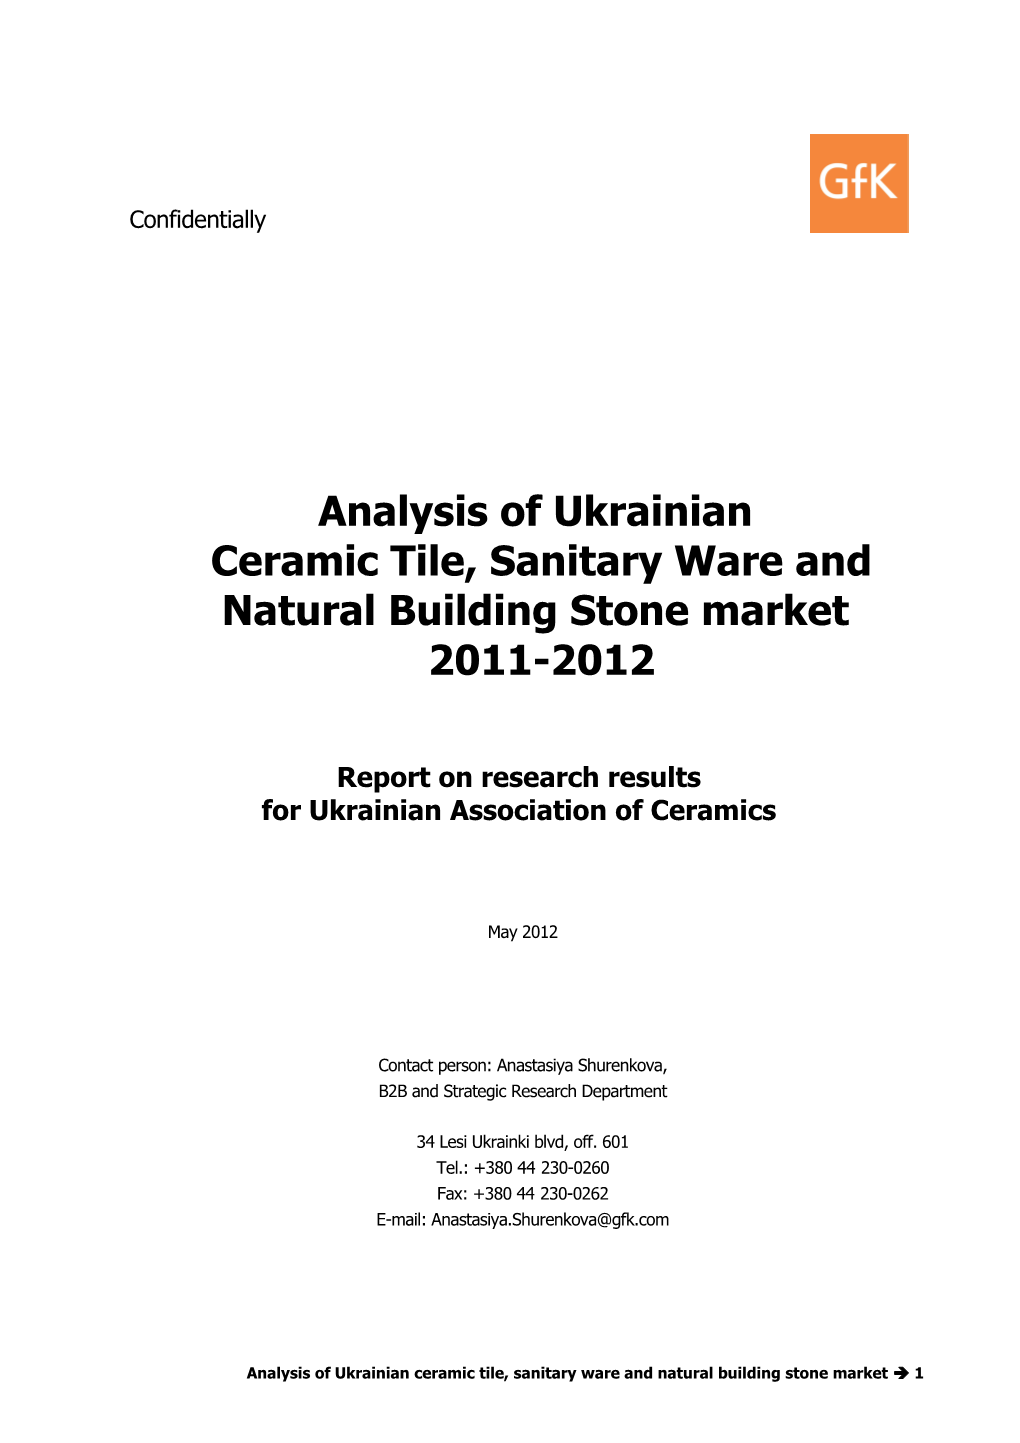 Report on Research Results for Ukrainian Association of Ceramics